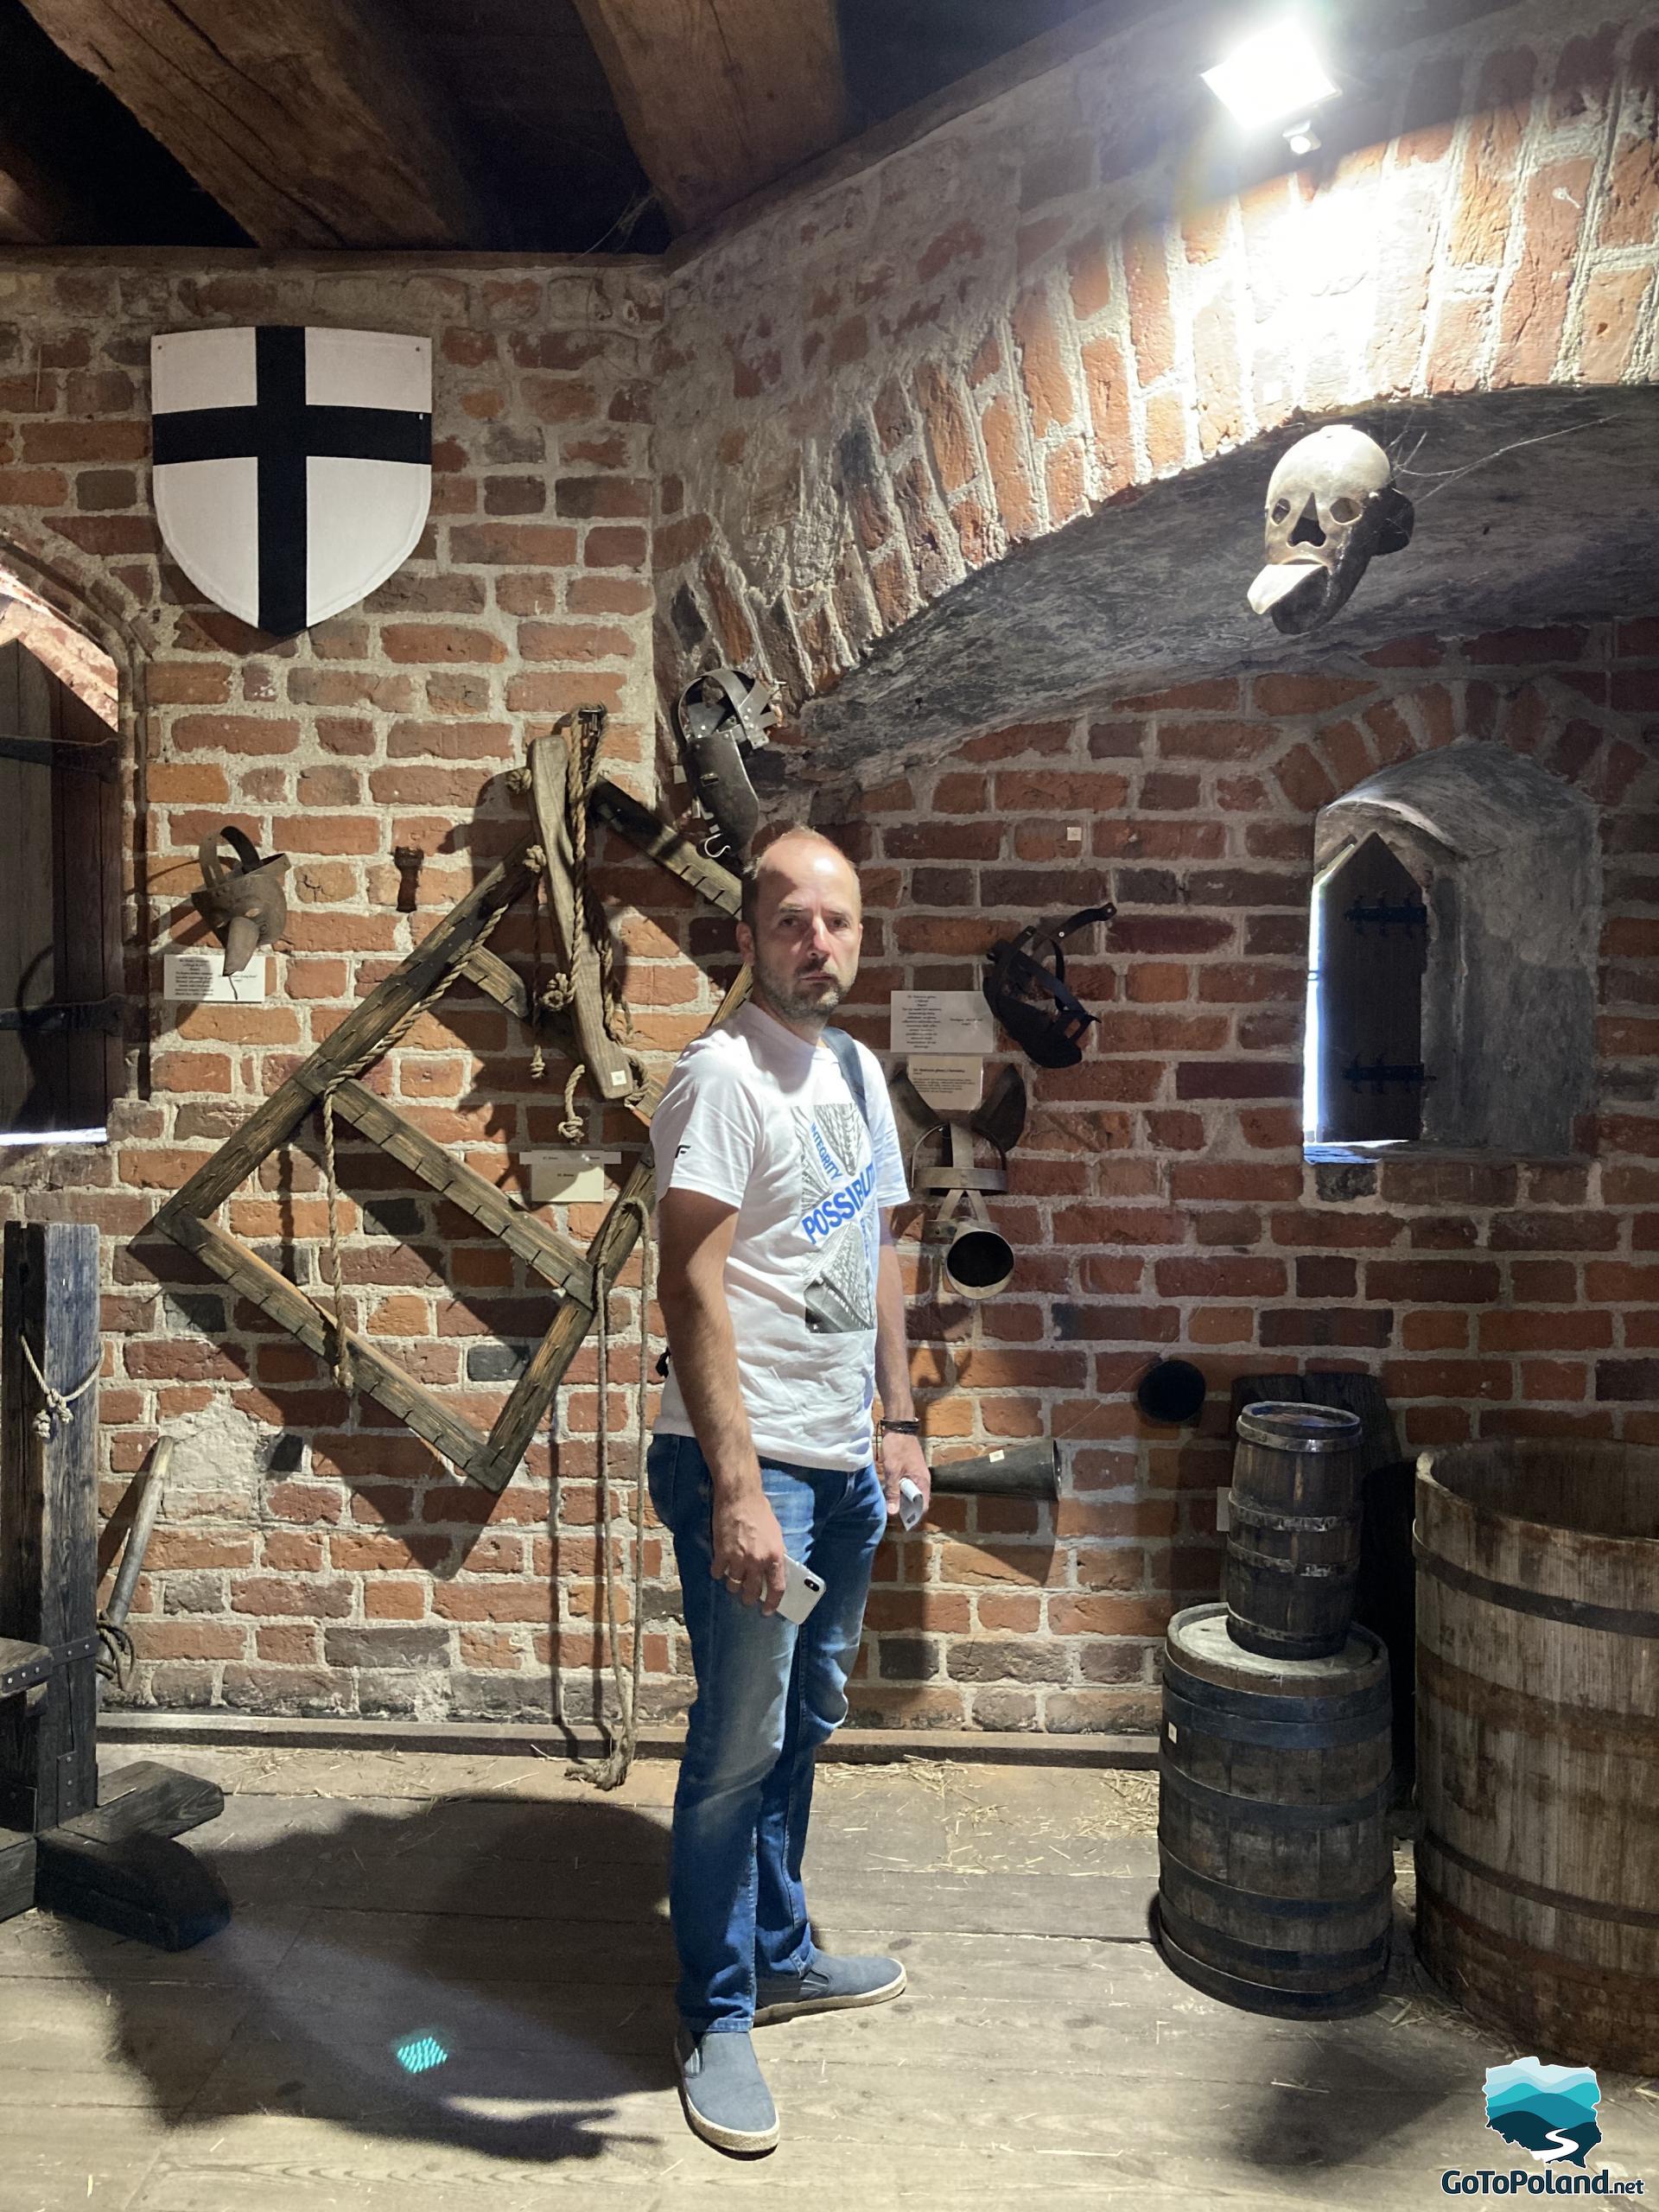 a man standing in a room in a former castle, the room is filled with old instruments of torture